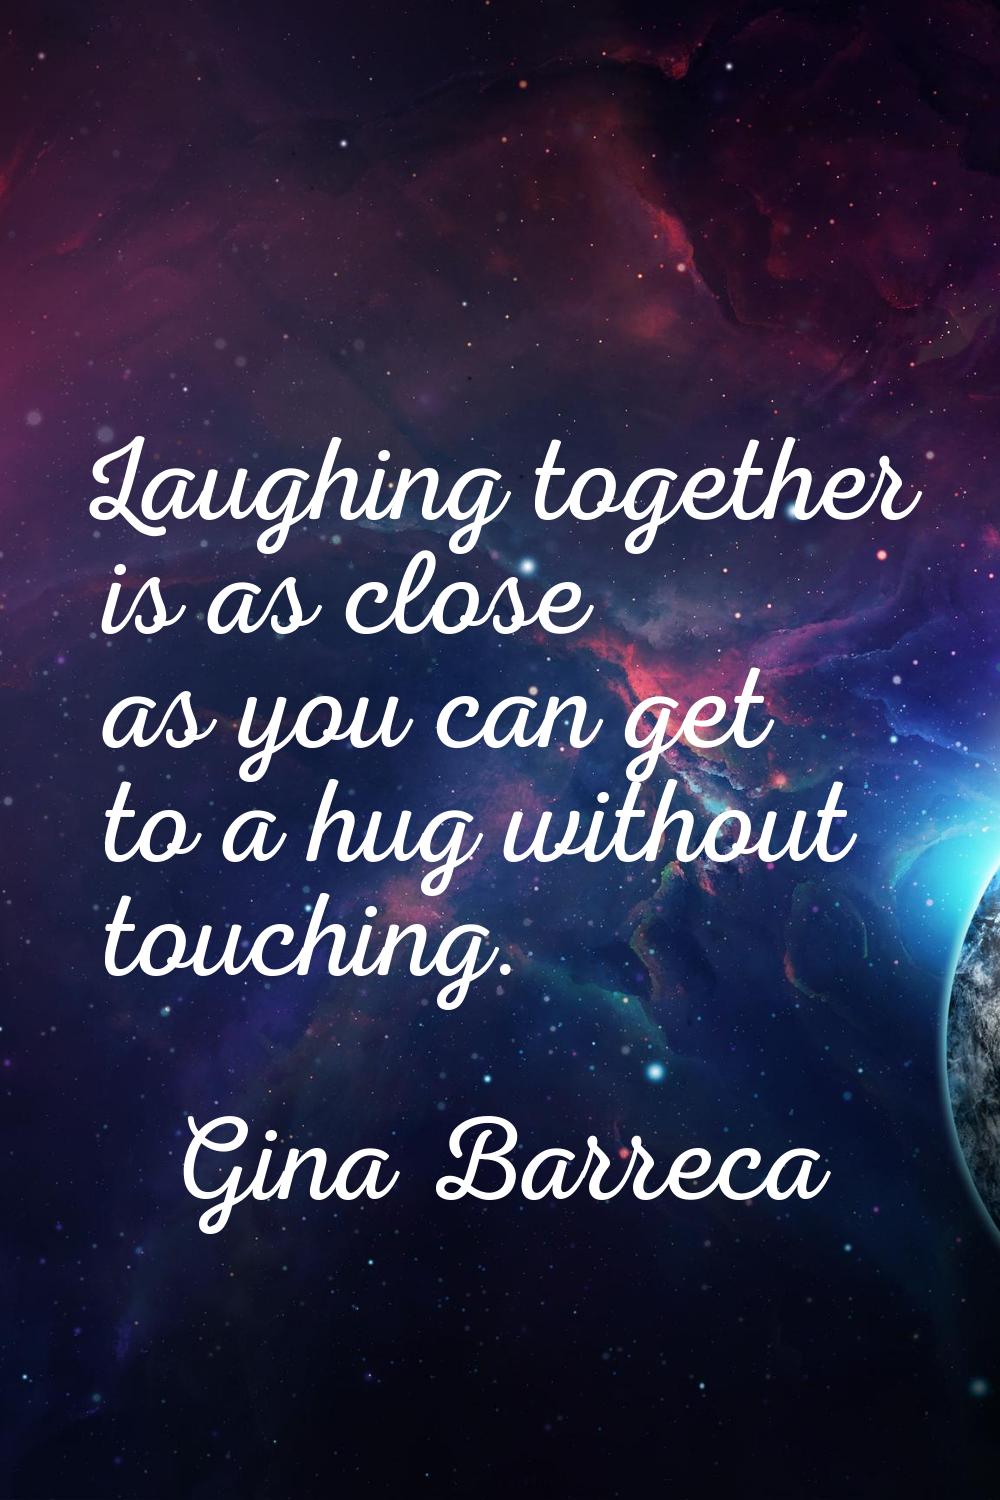 Laughing together is as close as you can get to a hug without touching.